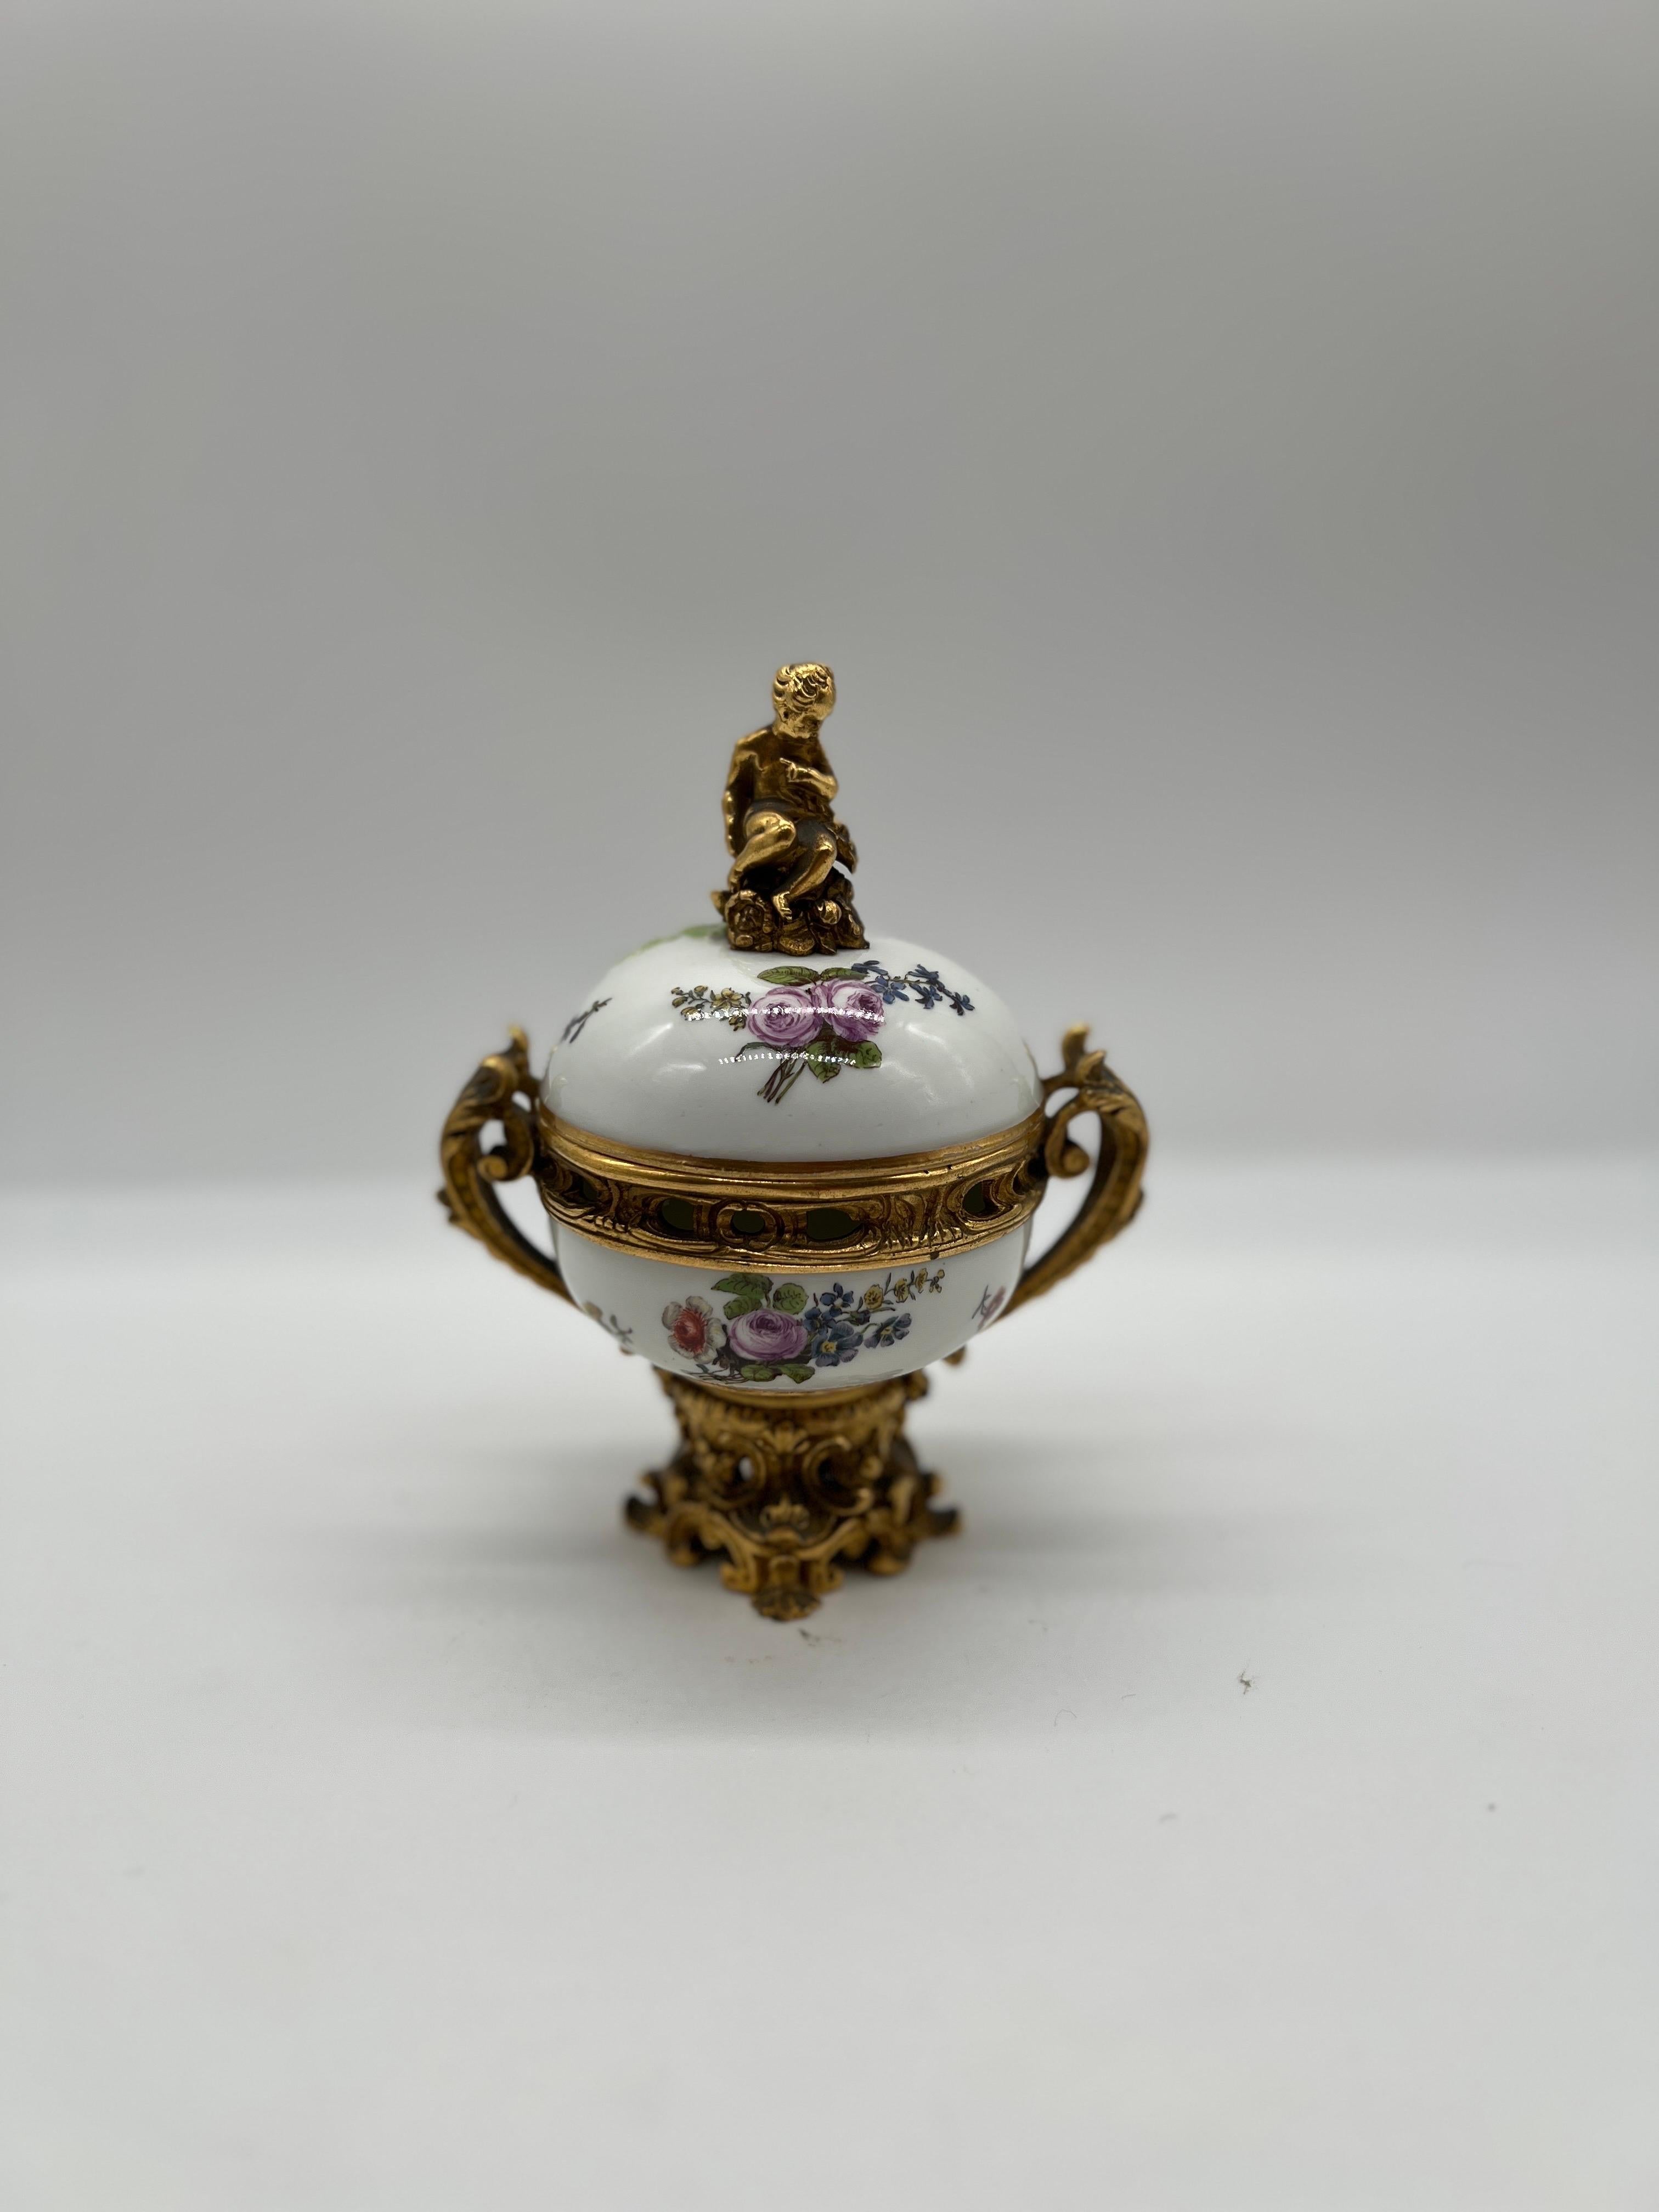 Meissen Porcelain (German, founded 1710), mid 19th century.

A beautiful and fine quality Meissen porcelain potpourri urn. The porcelain which is decorated polychrome decorated floral motifs and a raised green vine which accents the bronze cherub or